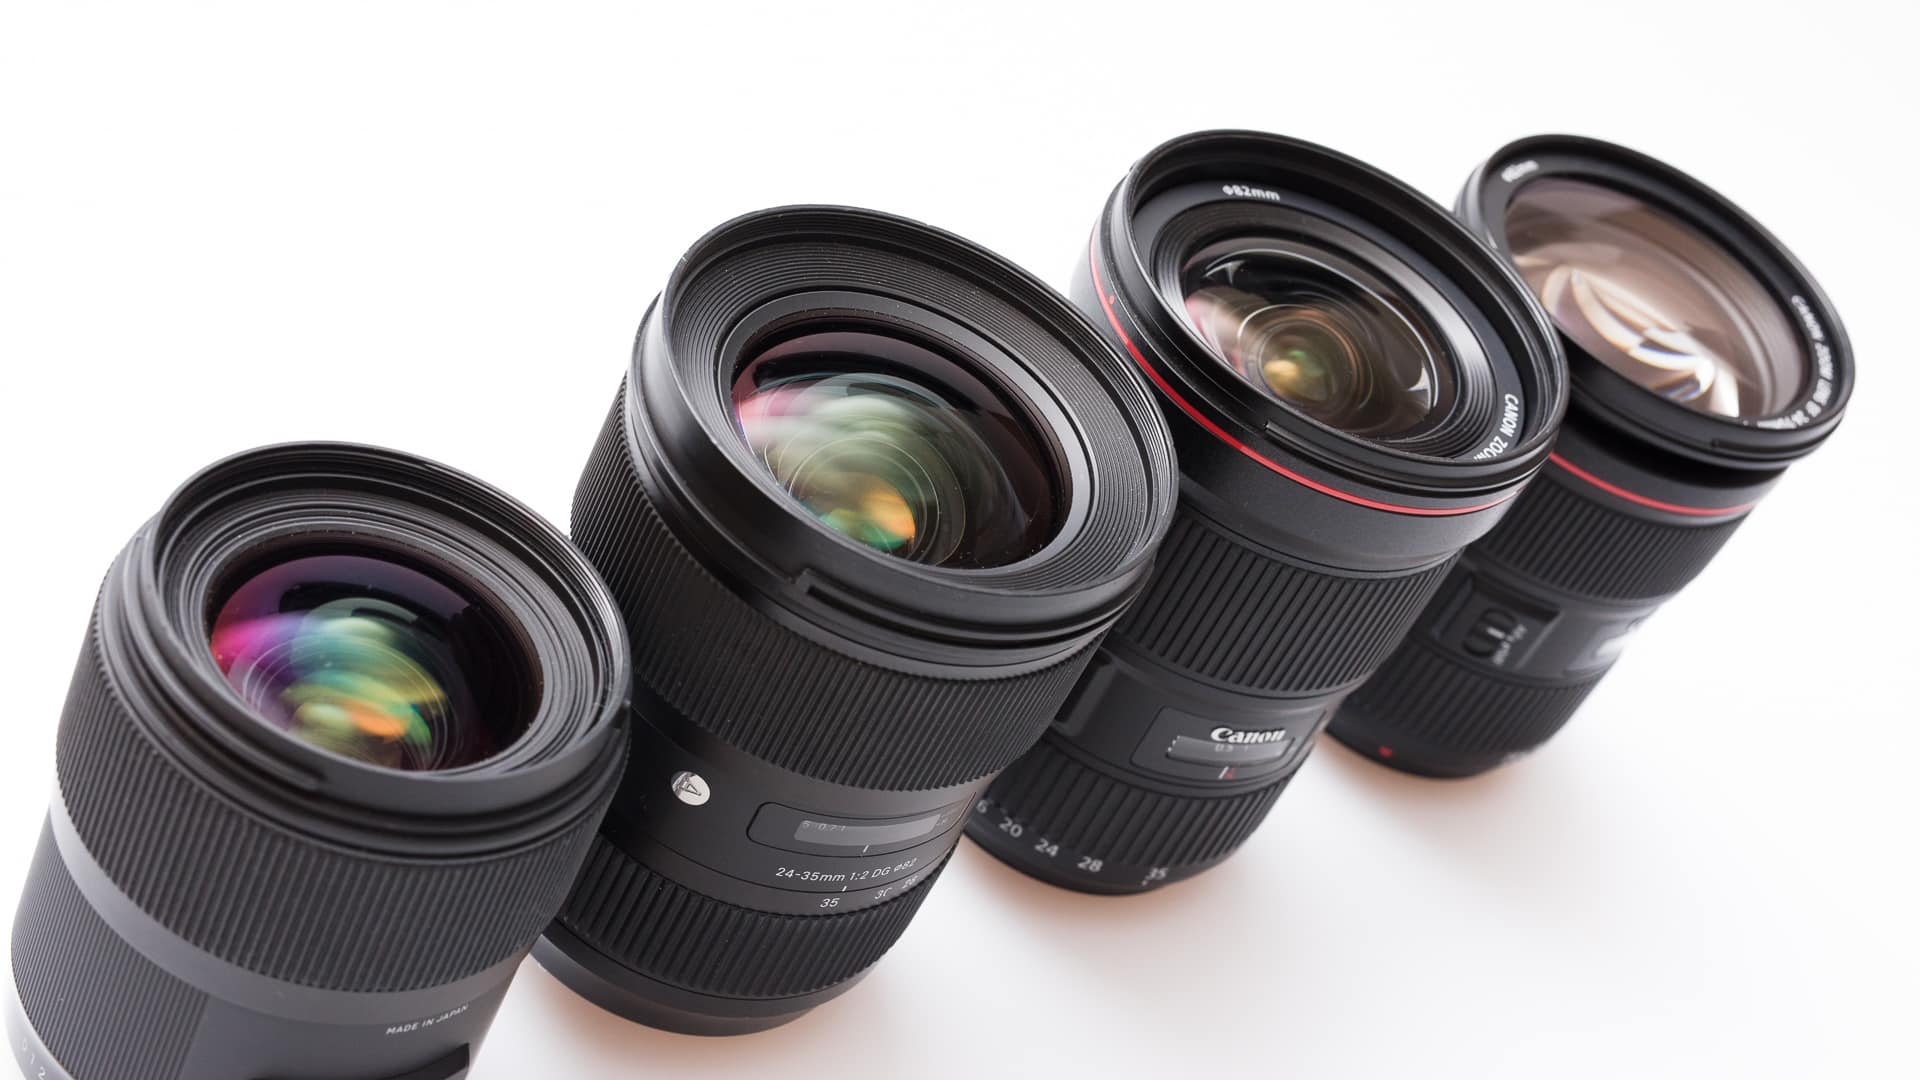 [Test] 4 lenses, 35mm, f/2.8: See Which Lens Stood Up Best